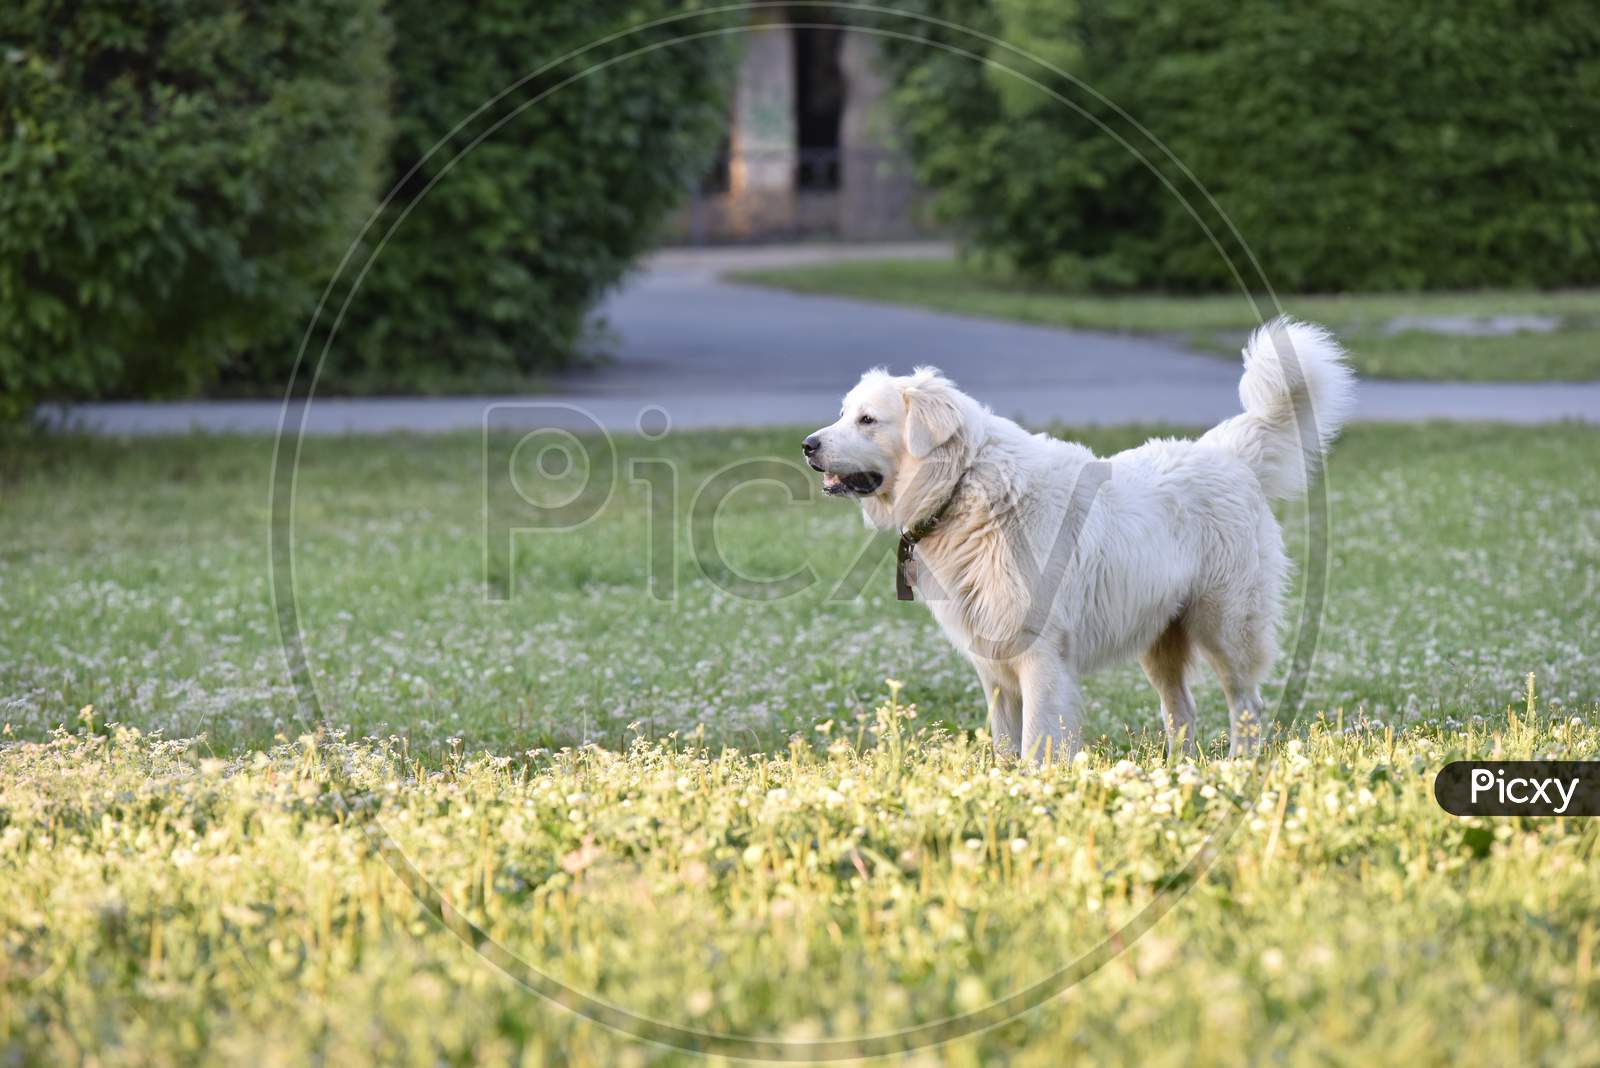 Big White Dog In The Park On The Grass